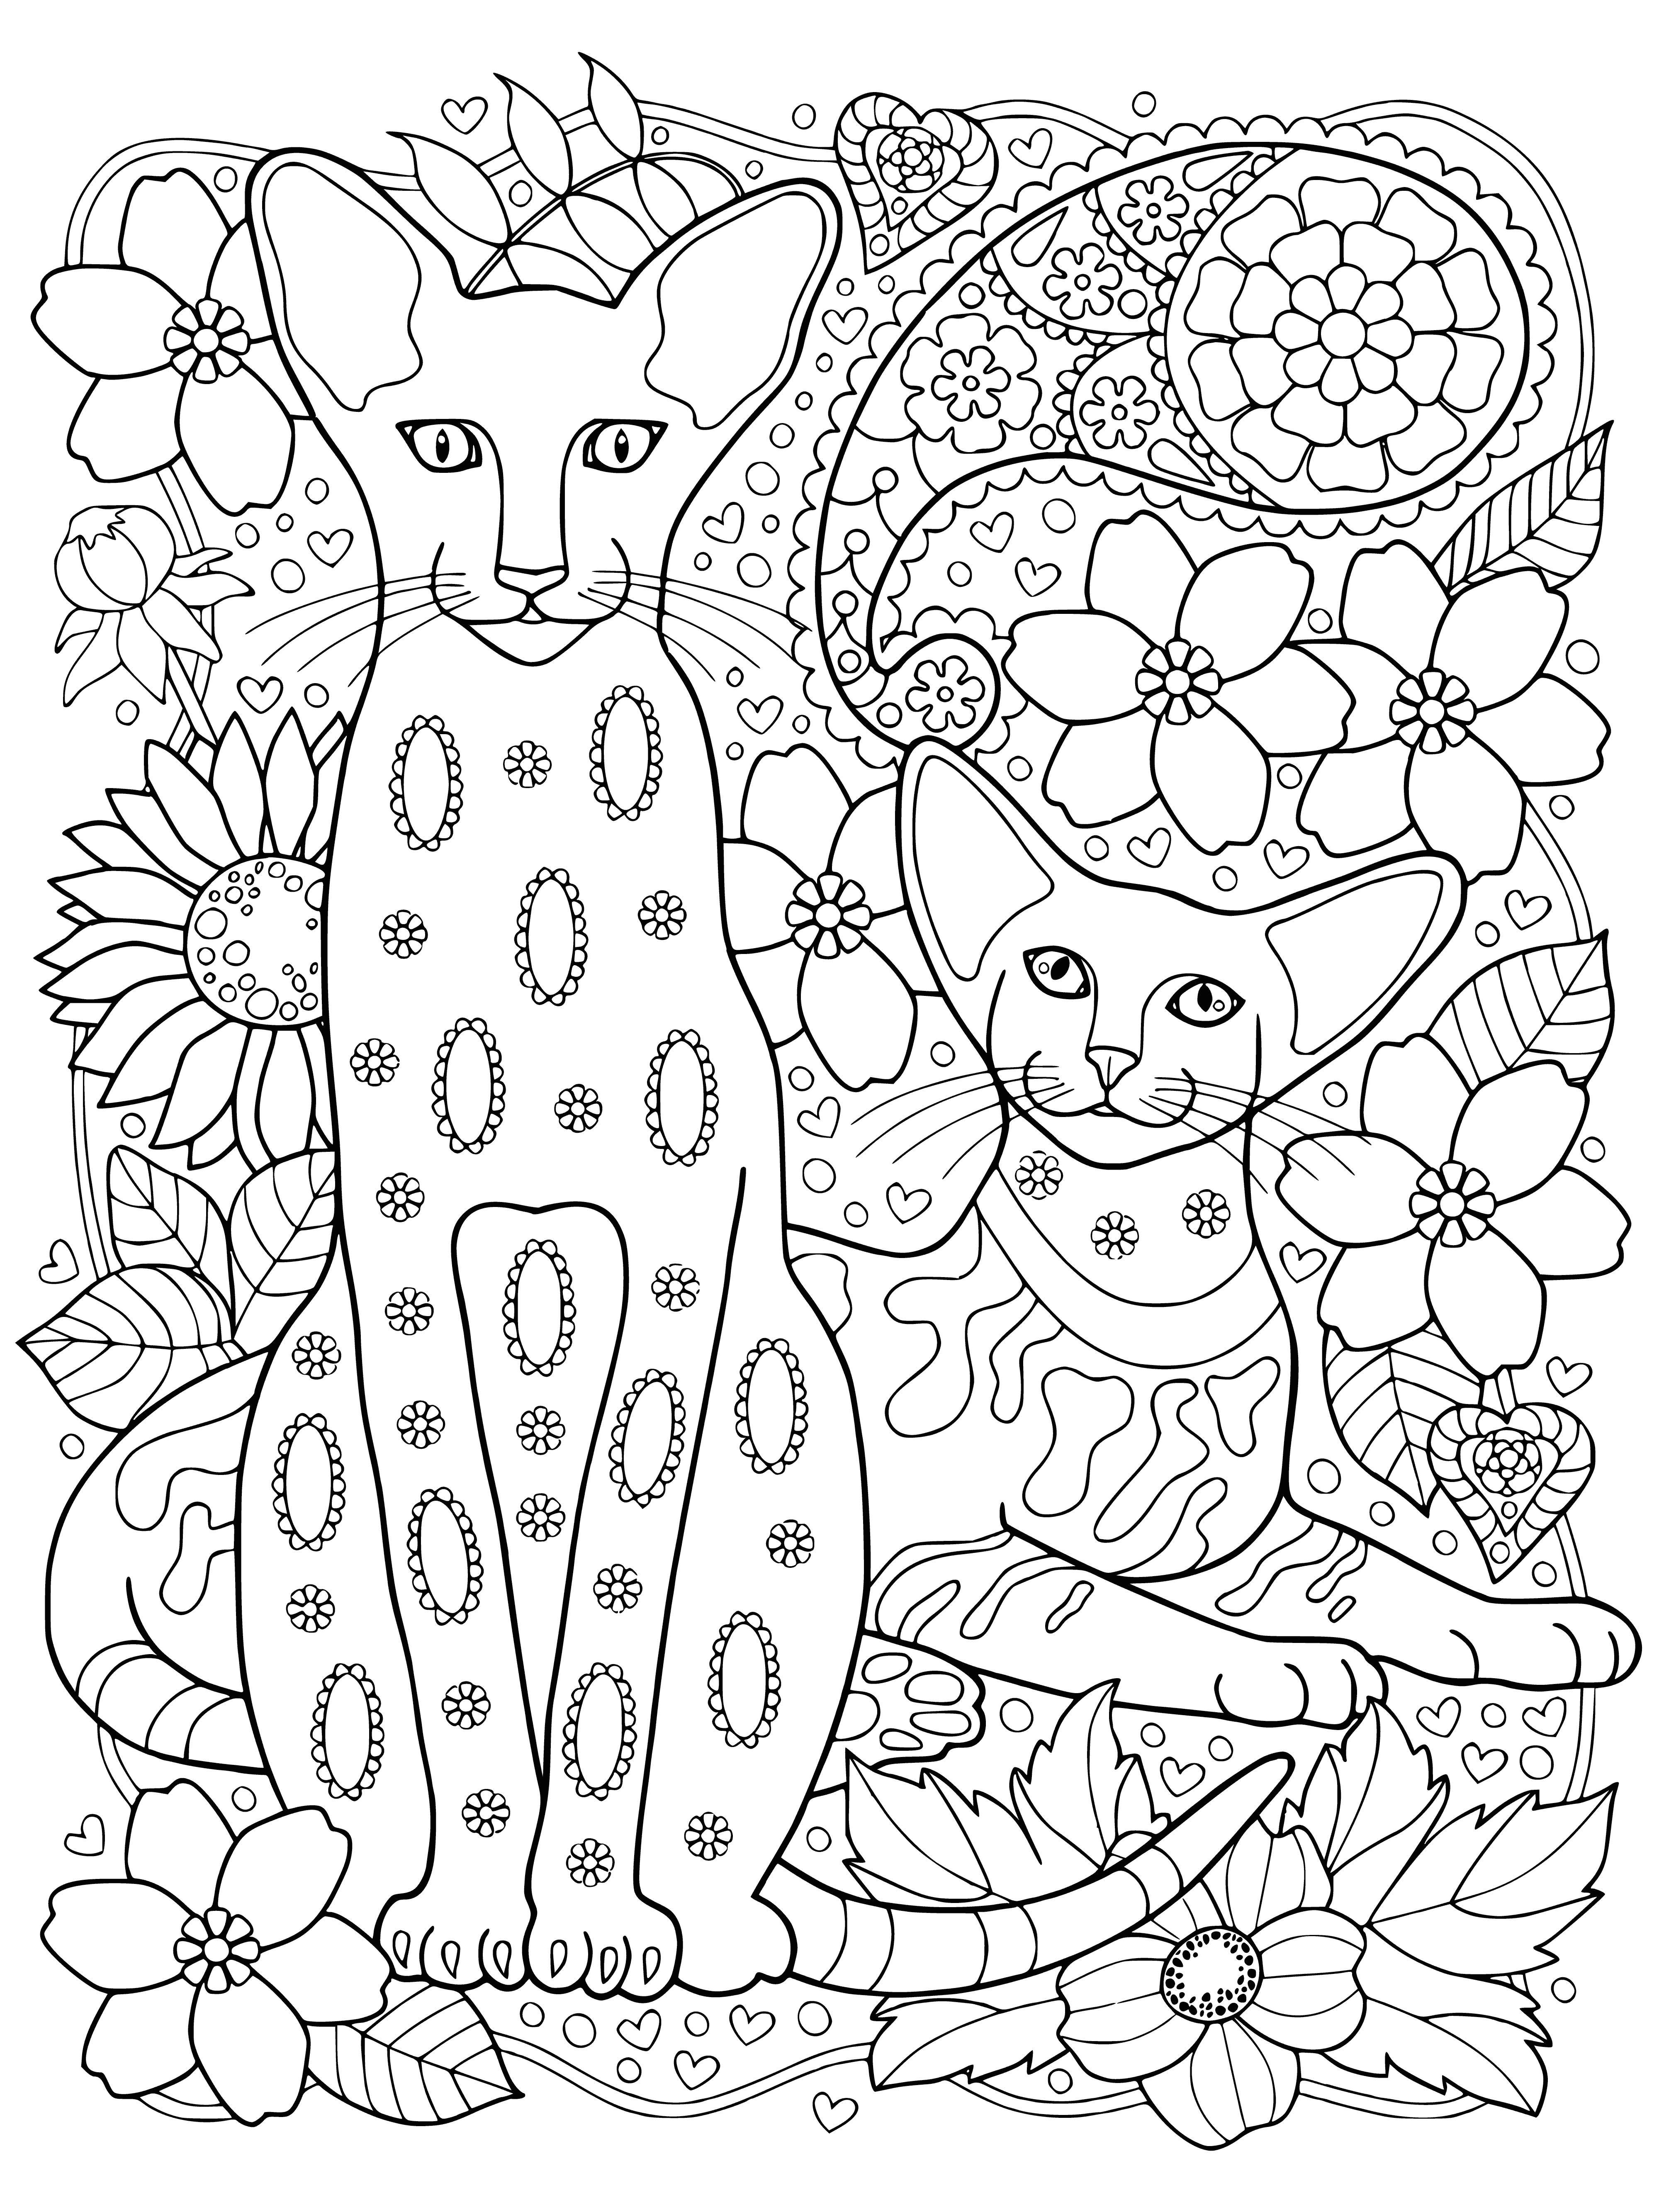 coloring page: Two relaxed sphynx cats, one pink one blue, recline amidst flowers & leaves on a coloring page.